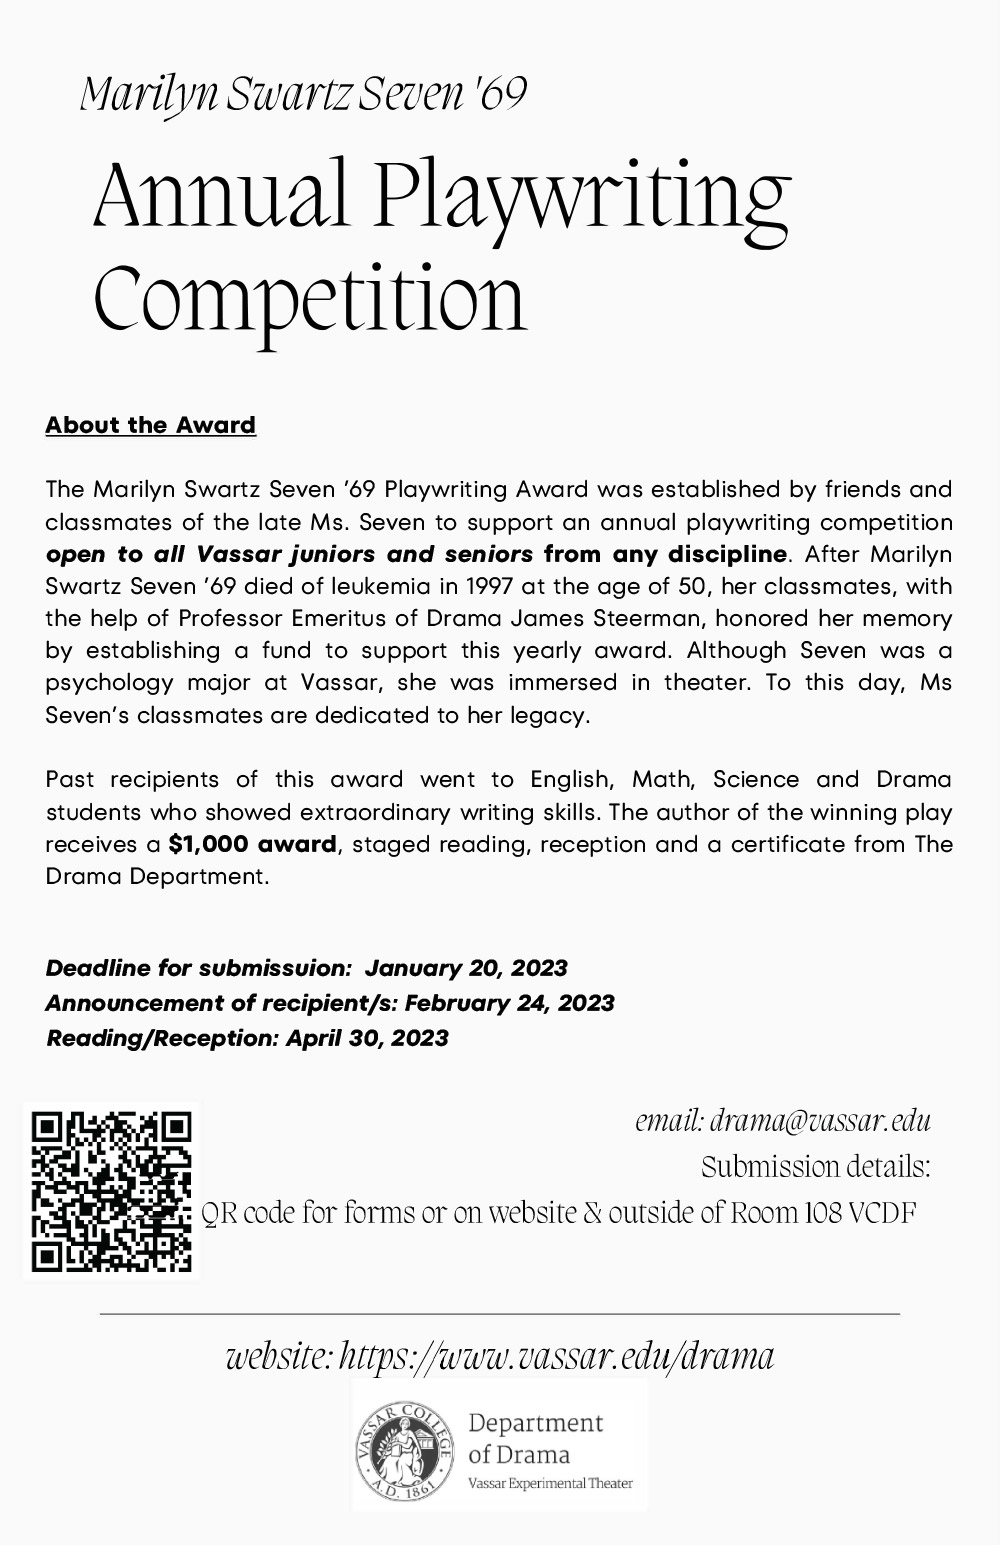 The Annual Playwriting Competition Marilyn Swartz Seven 69 Flyer - Download the PDF